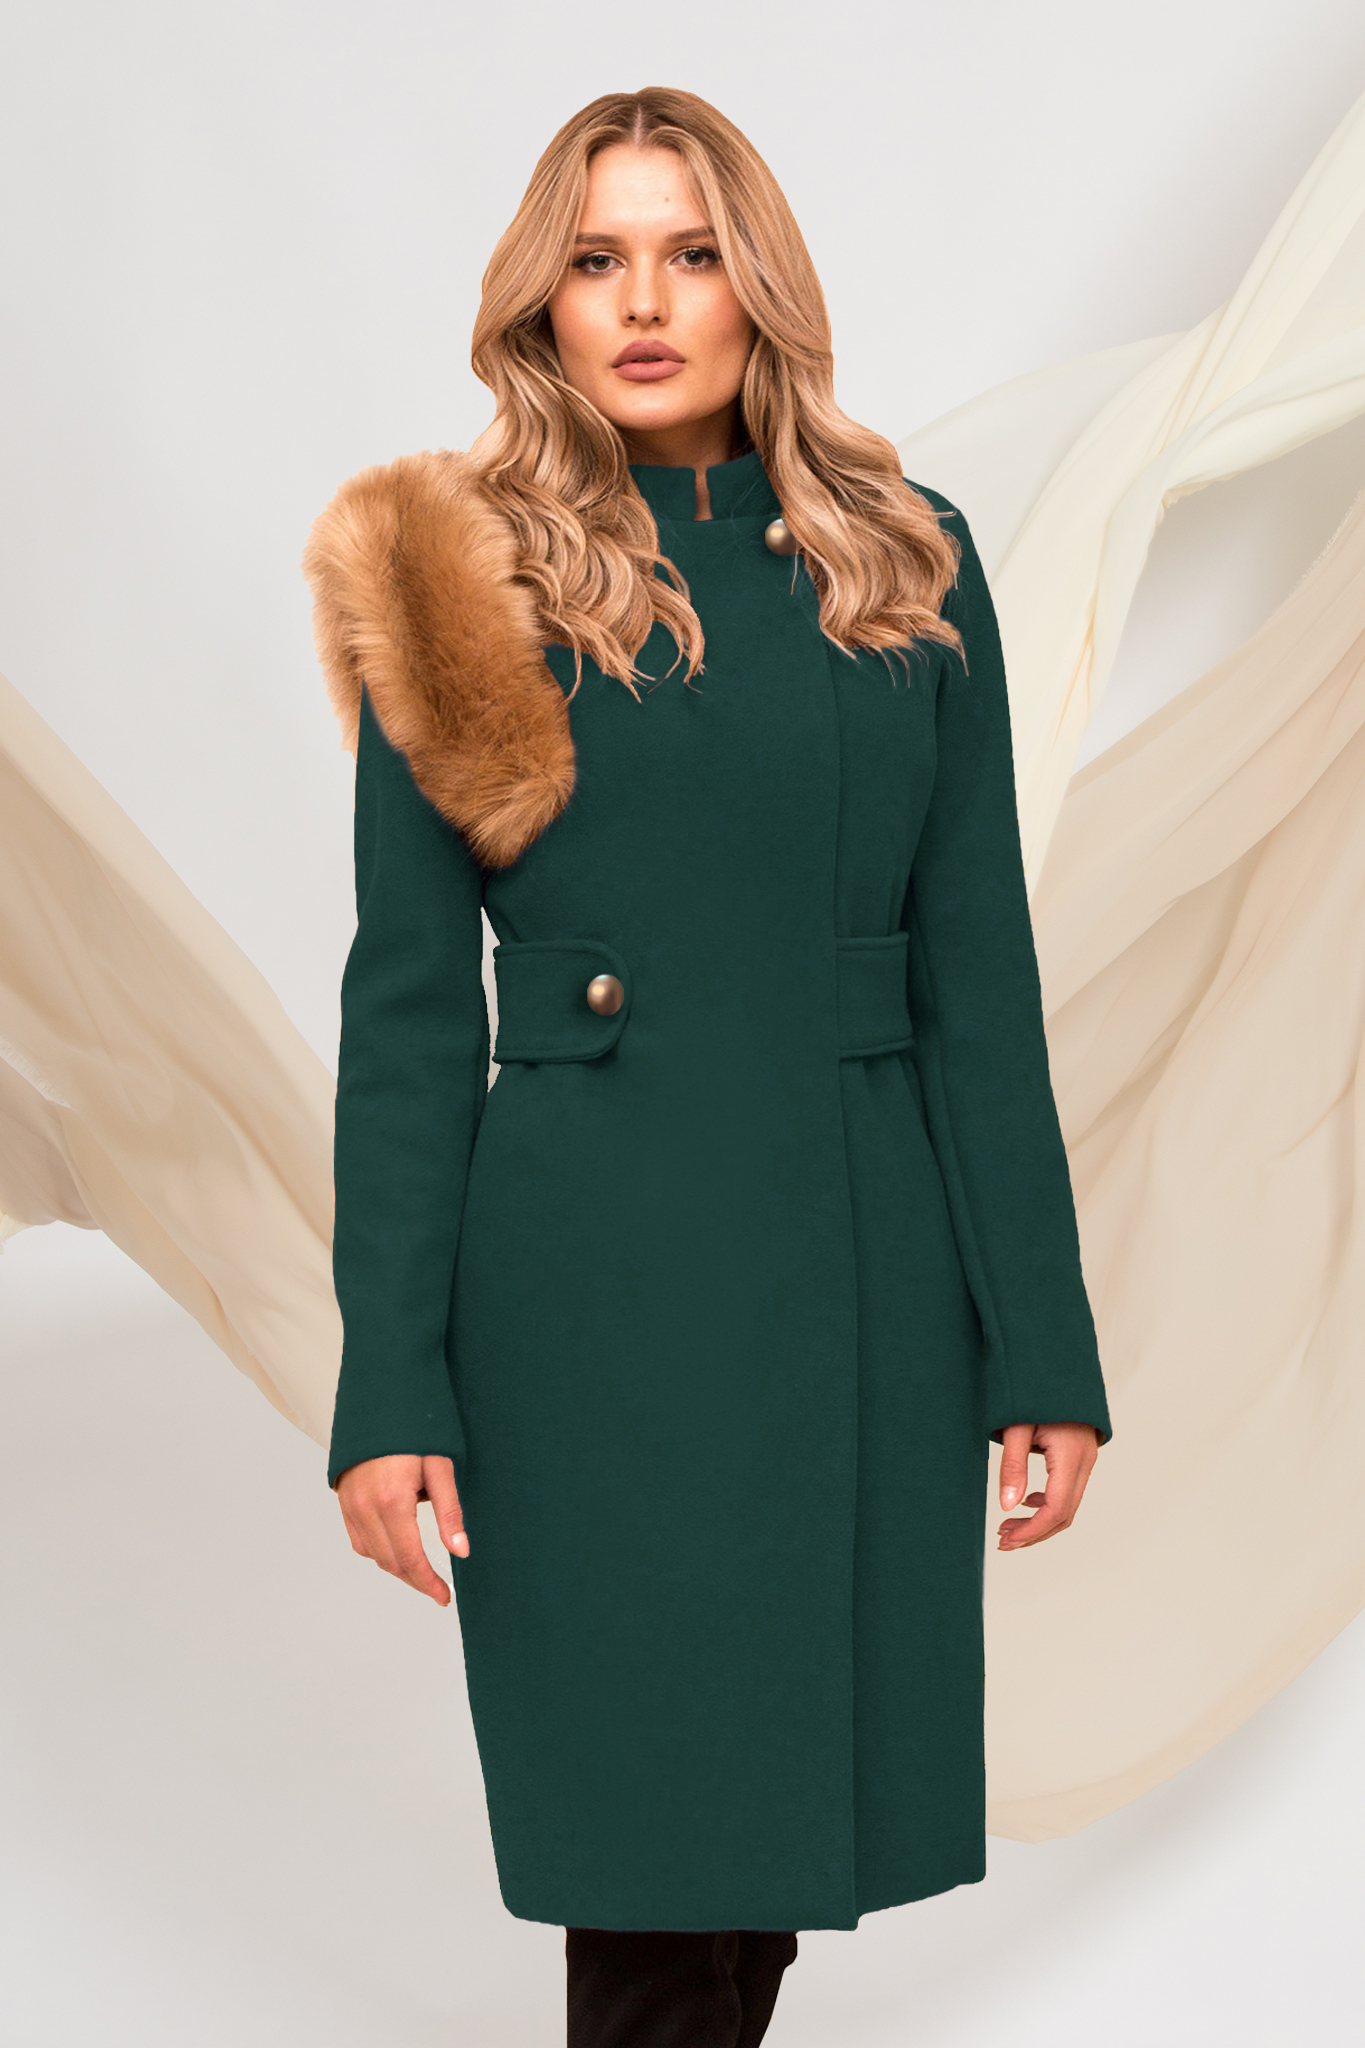 Coat darkgreen cloth with faux fur details accessorized with tied waistband